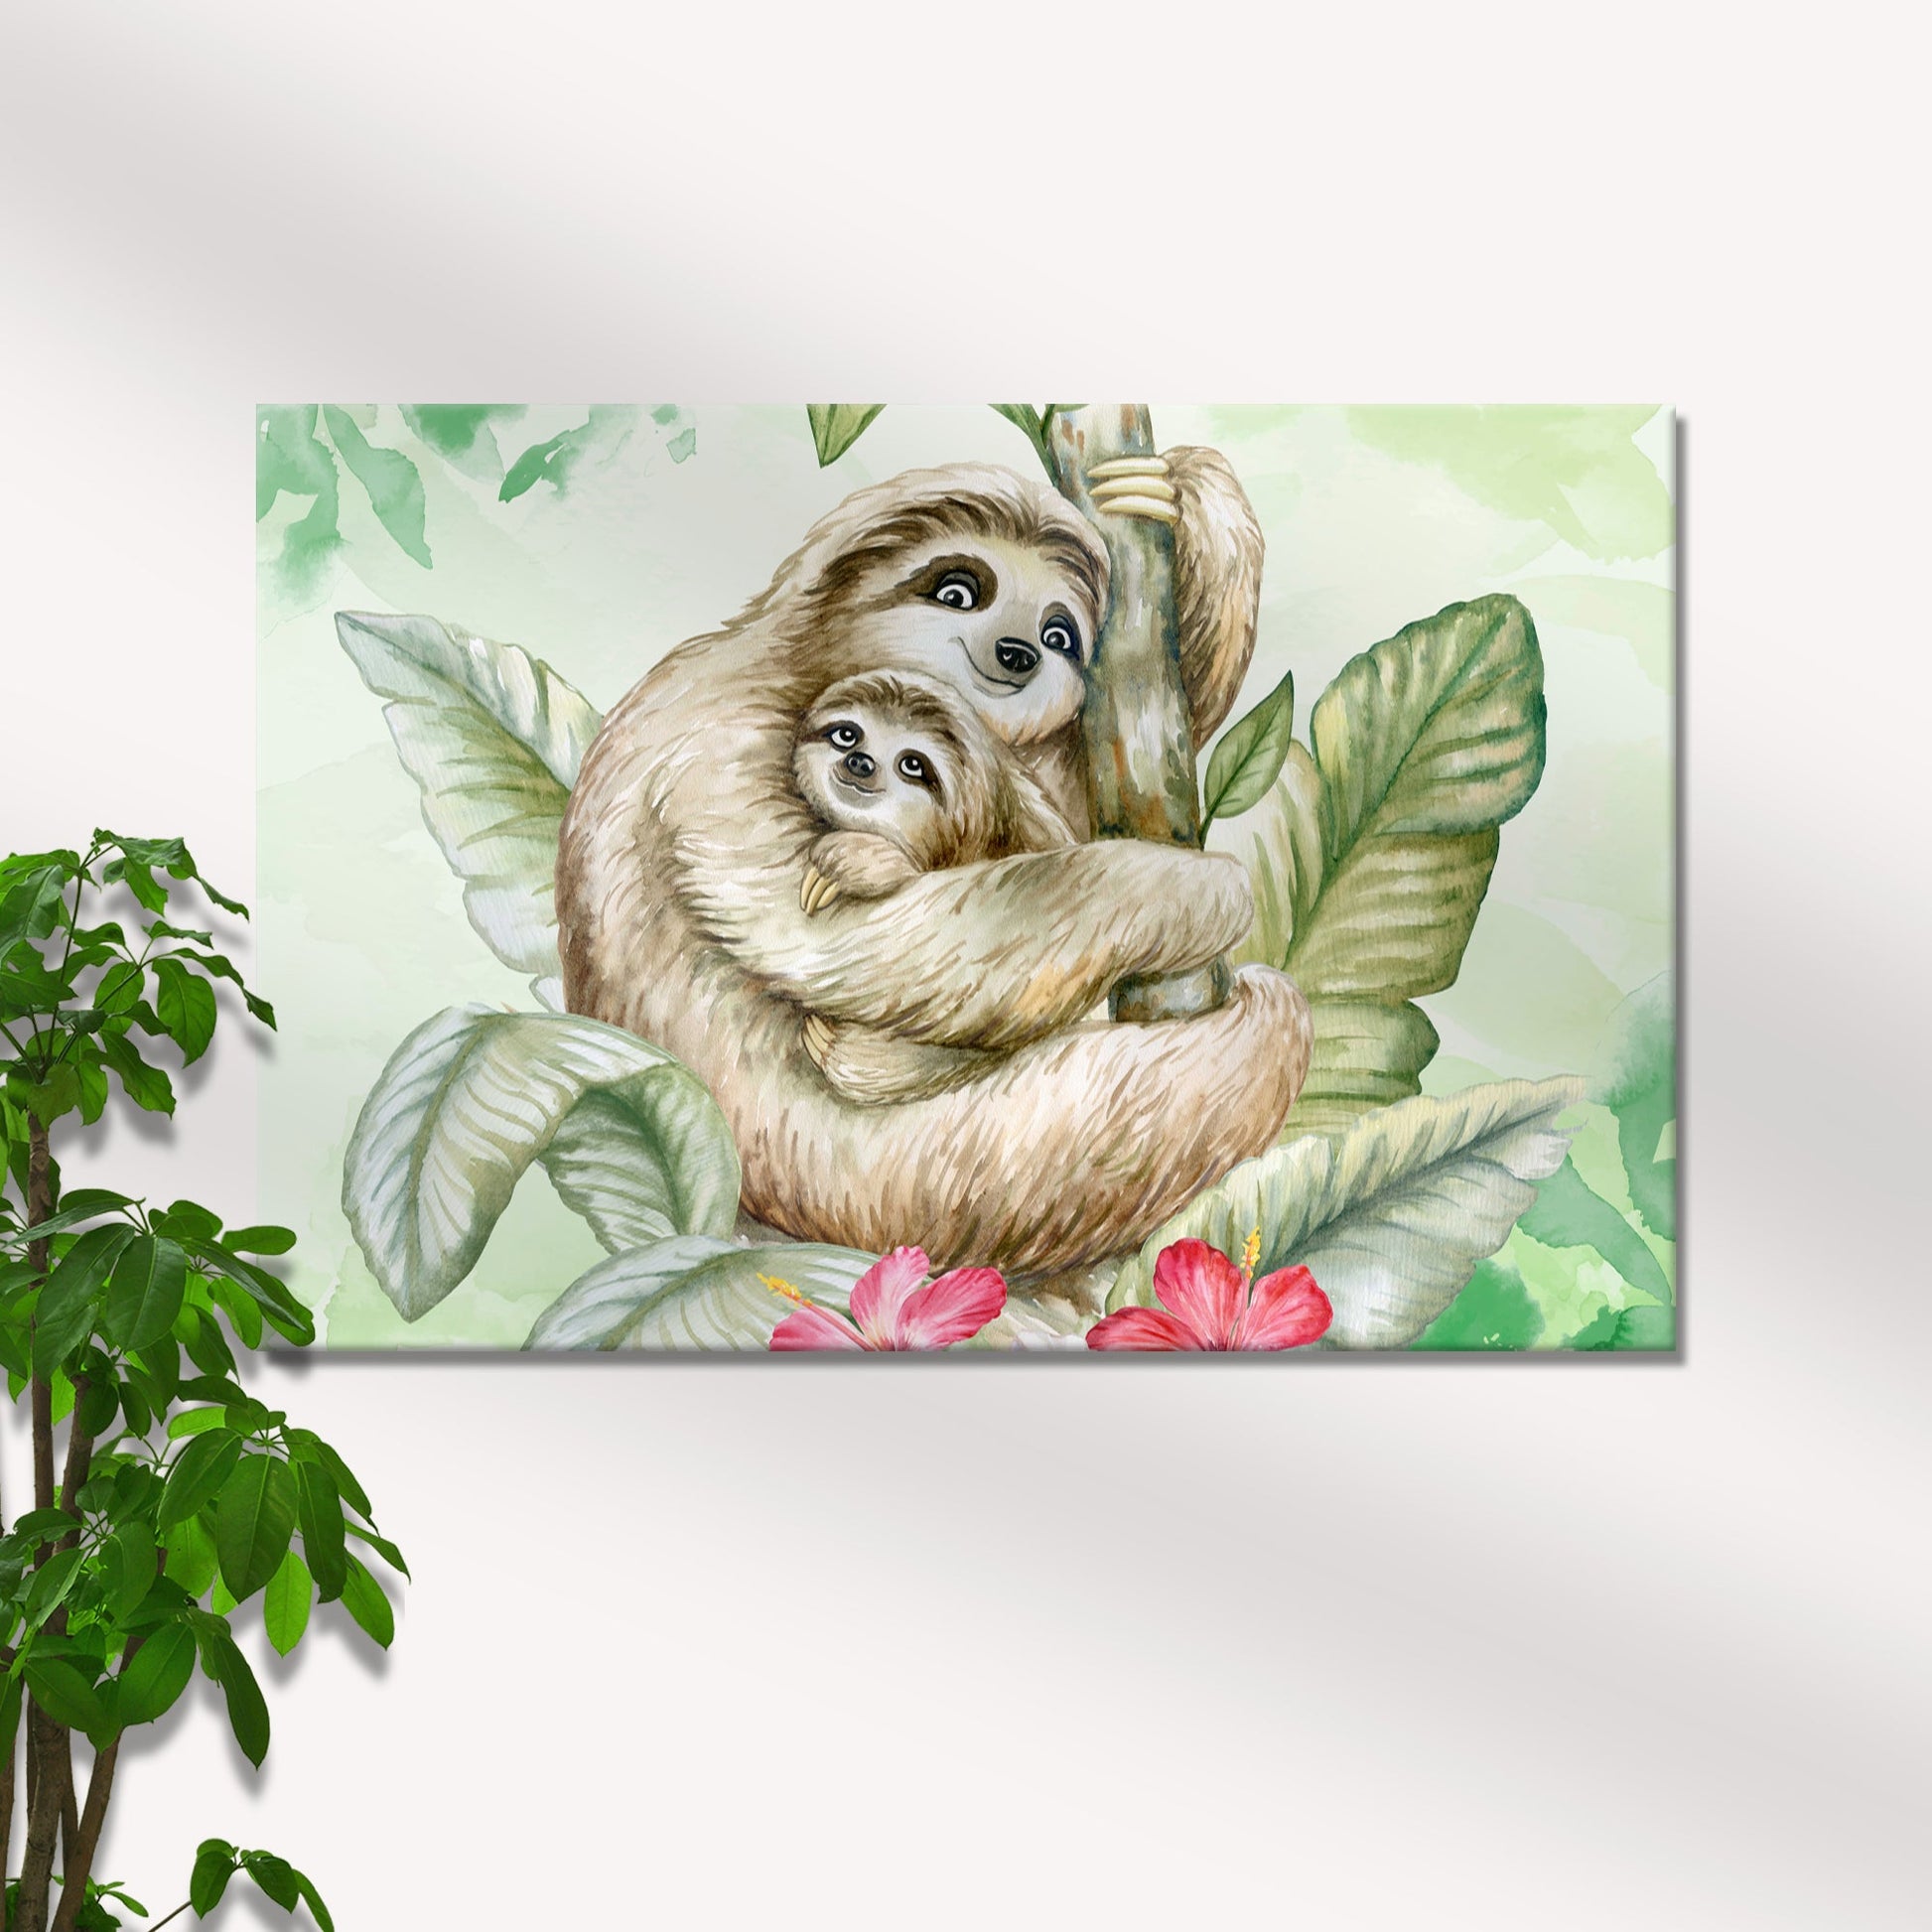 Smiling Sloth  Canvas Wall Art with Tranquil Charm